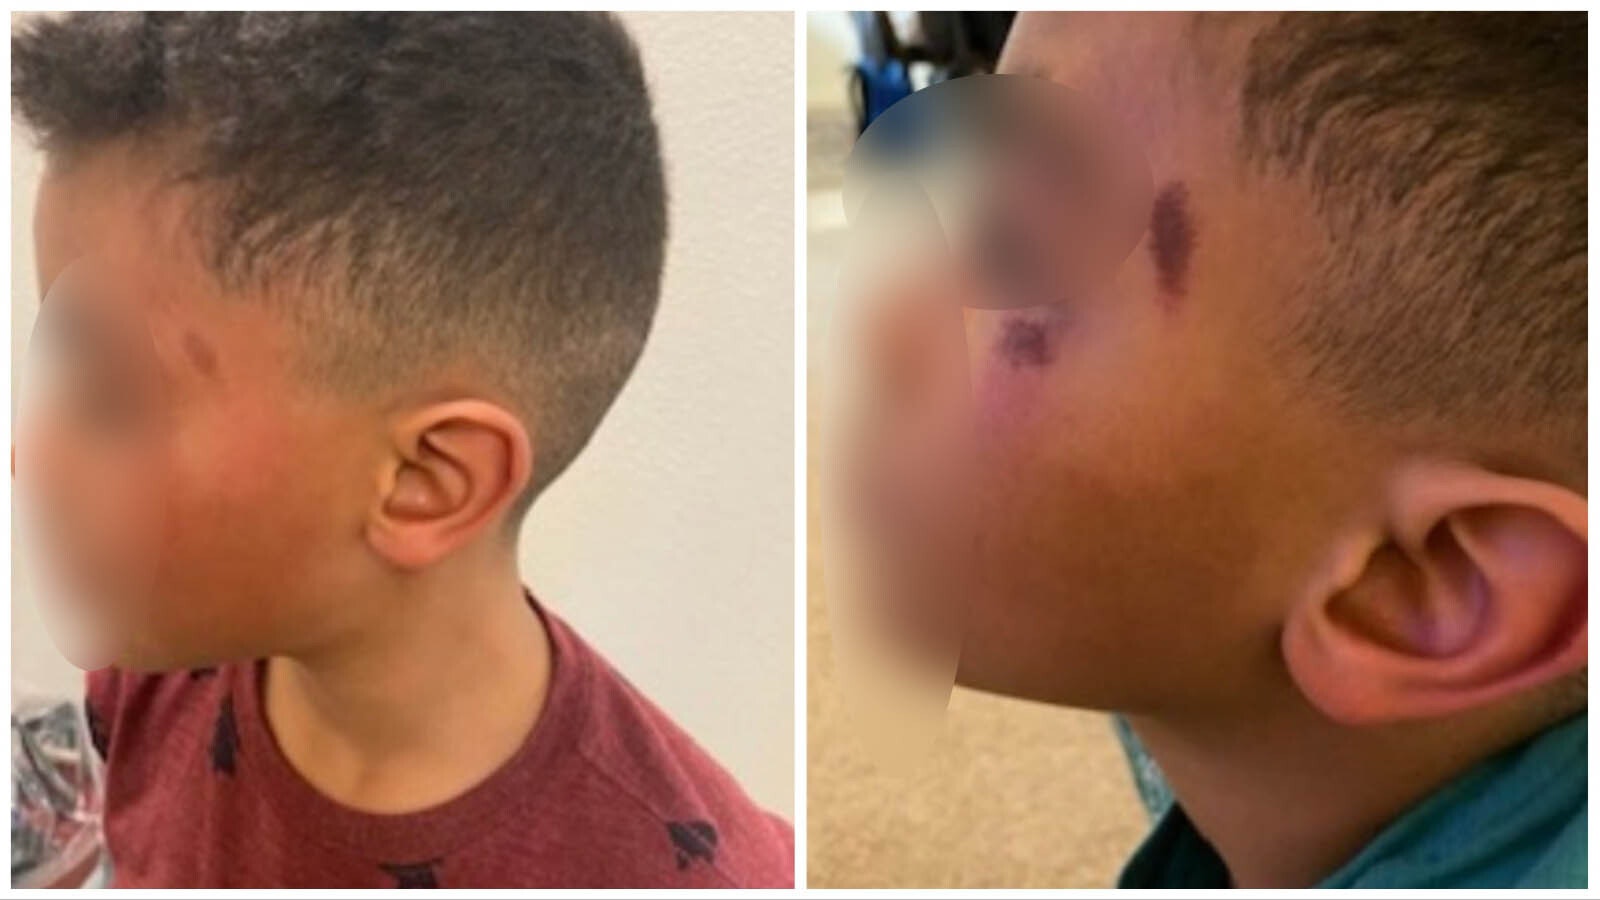 Injuries to the face of a former Cheyenne second grader allegedly caused by a Laramie County Sheriff's Office deputy, according to a lawsuit filed Tuesday. The child's identifying features have been blurred by Cowboy State Daily.